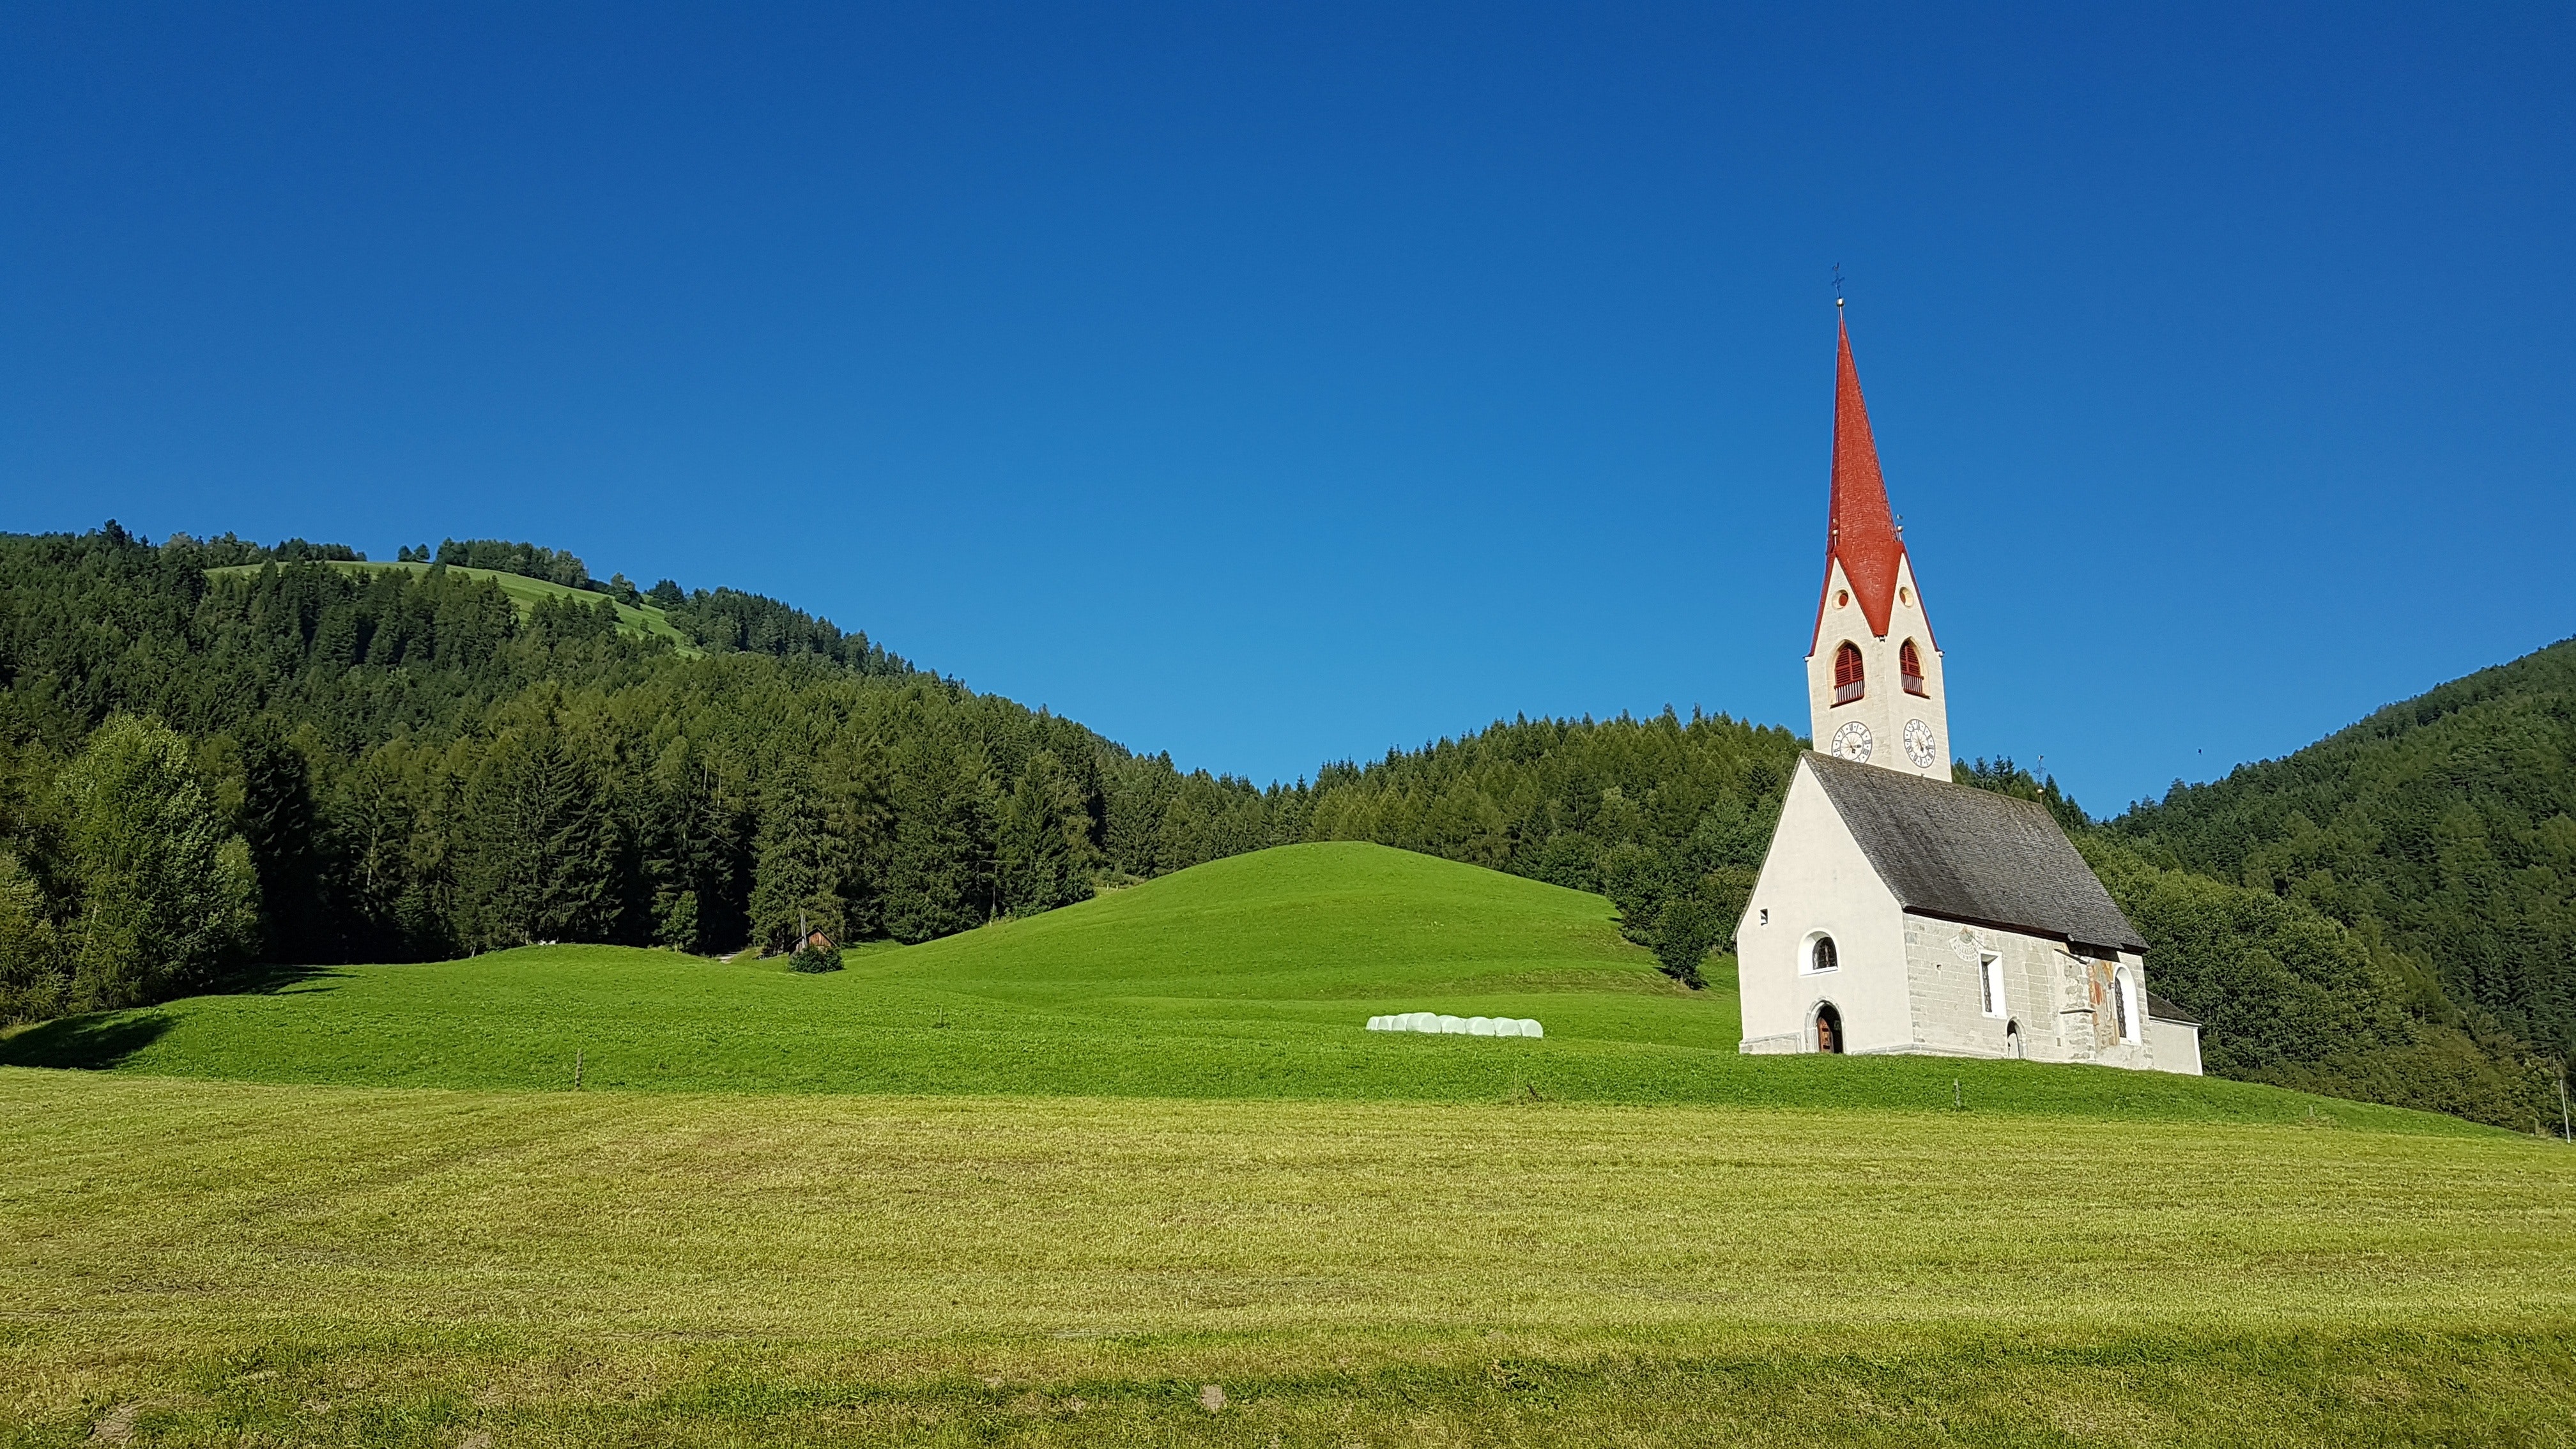 White gray and red chapel on green field during clear sky day time photo